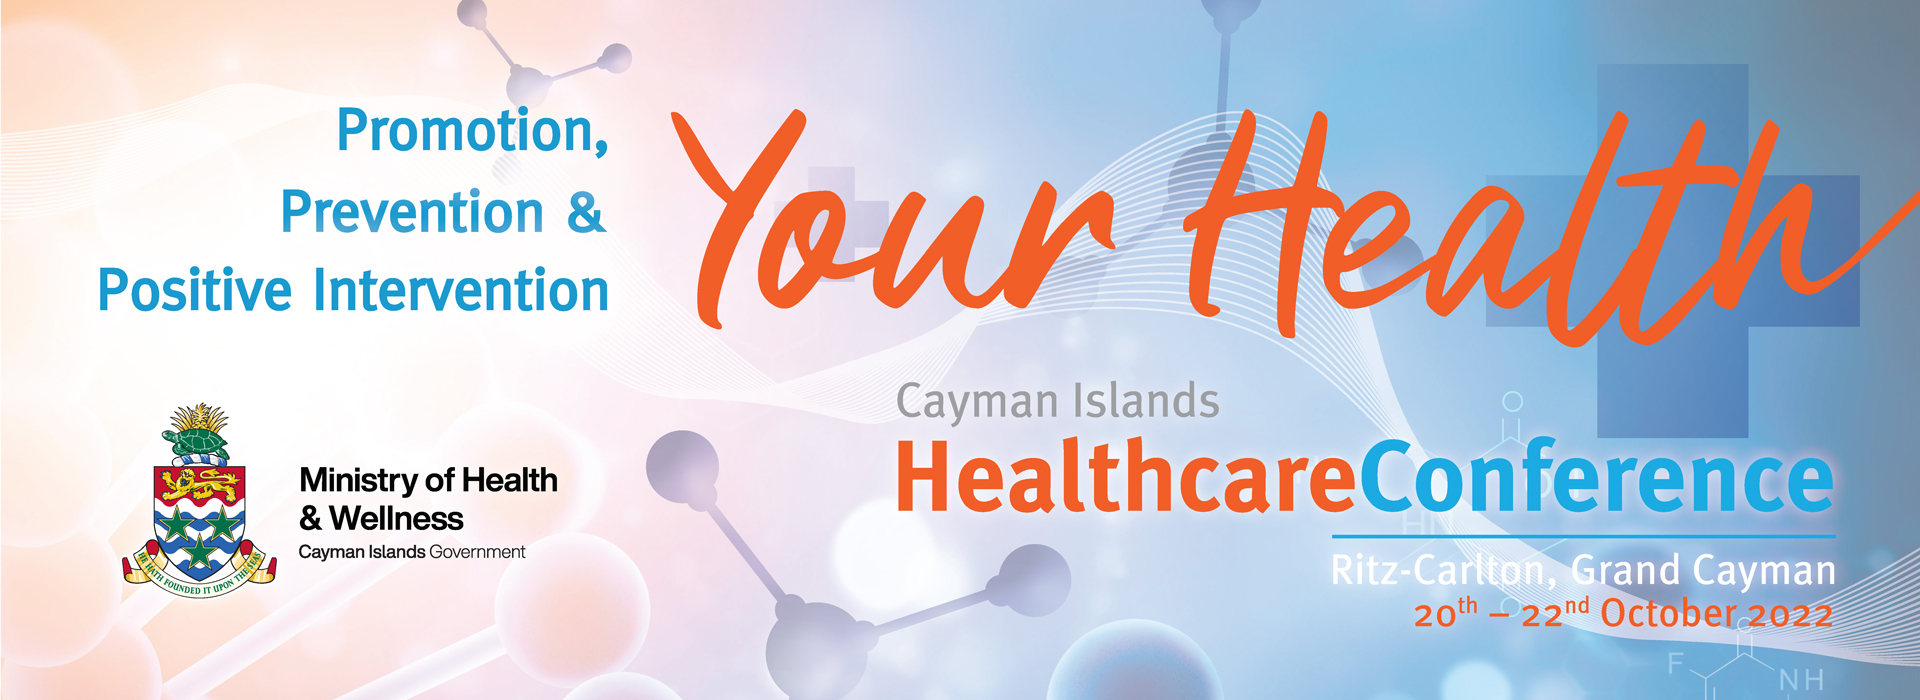 Cayman Islands Healthcare Conference